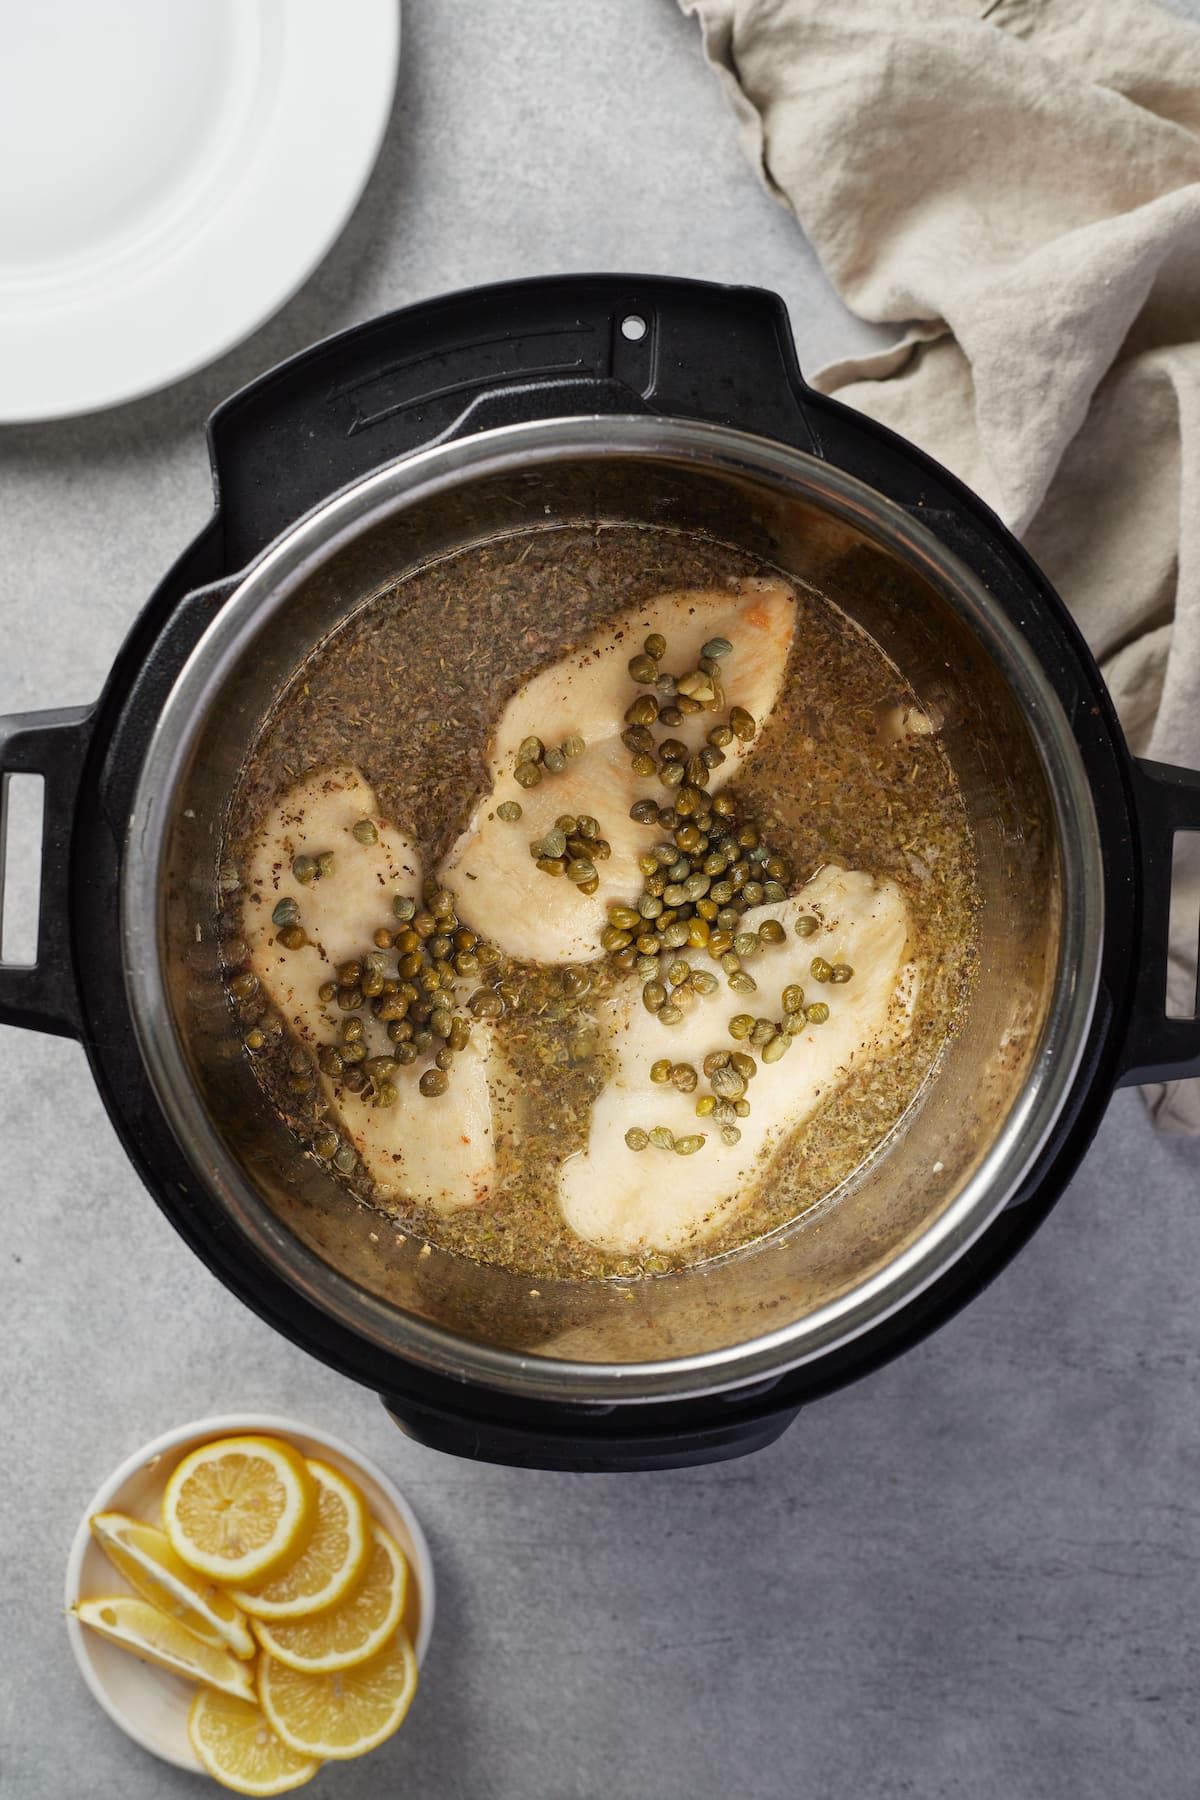 Chicken breasts and lemon sauce ingredients are combined in the Instant Pot.